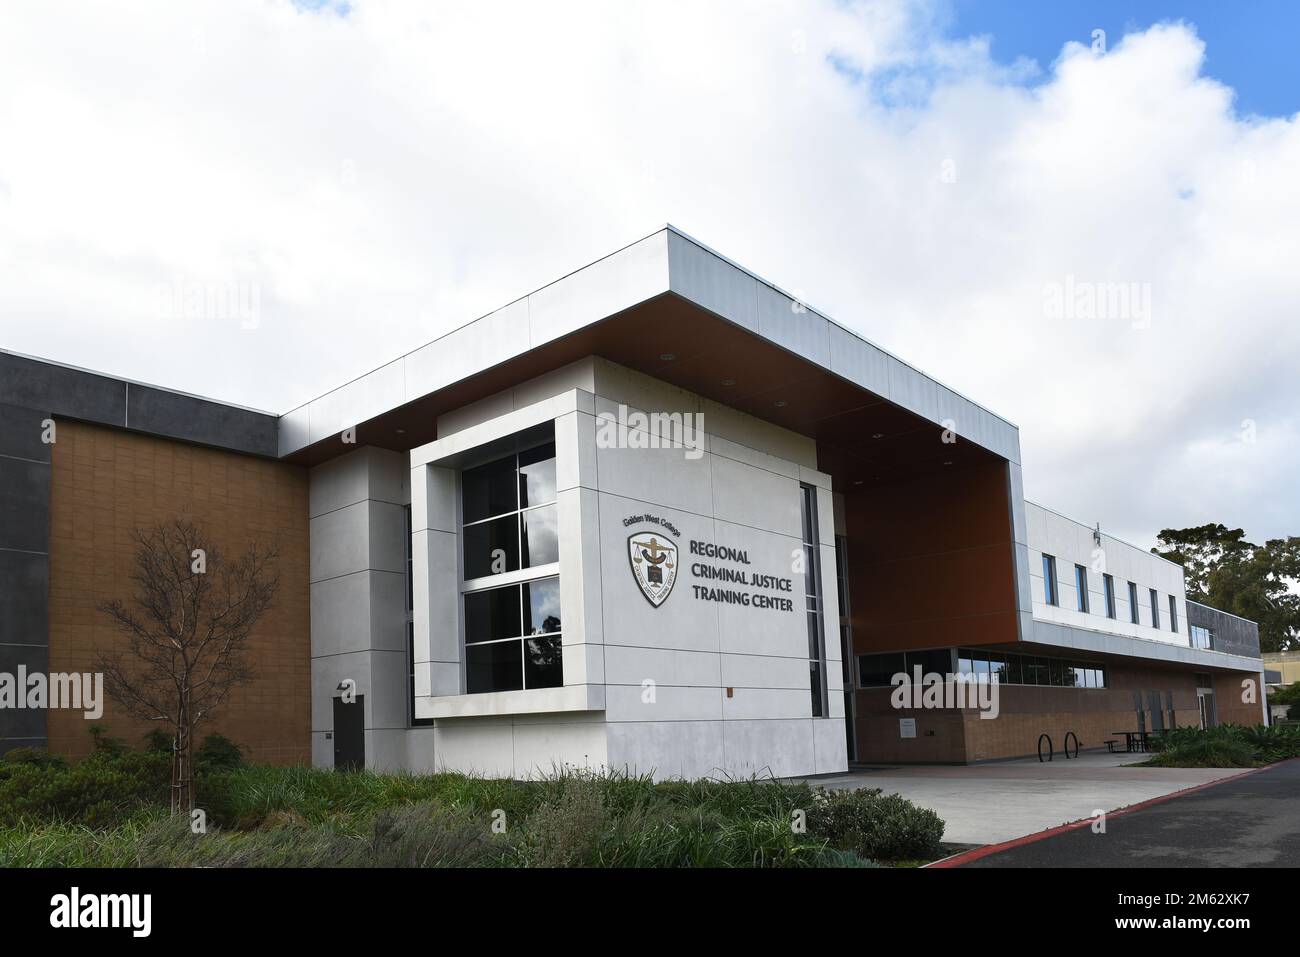 HUNTINGTON BEACH, CALIFORNIA - 01 JAN 2023: The Regional Criminal Justice Training Center on the campus of Golden West College. Stock Photo